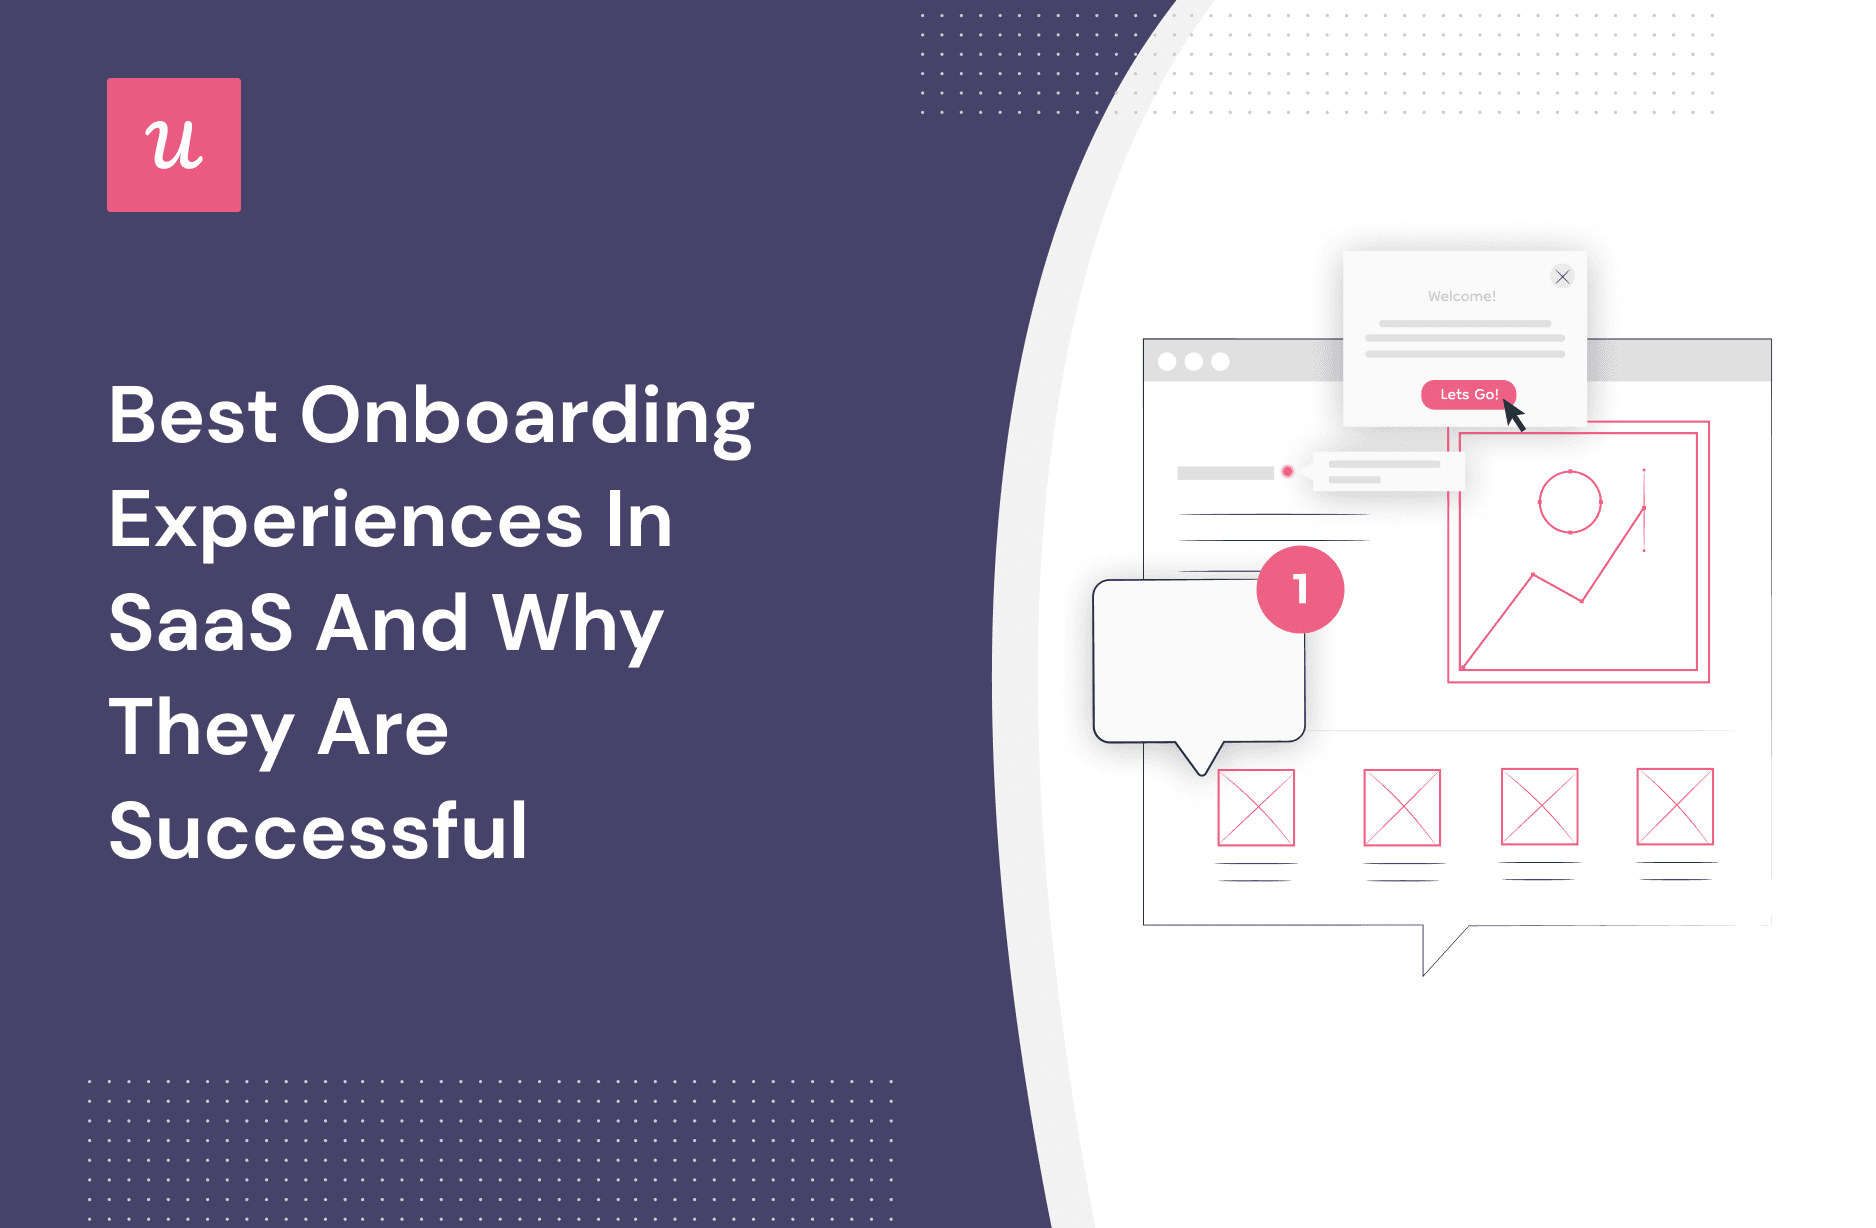 15 Best Onboarding Experiences in SaaS and Why They Are Successful cover